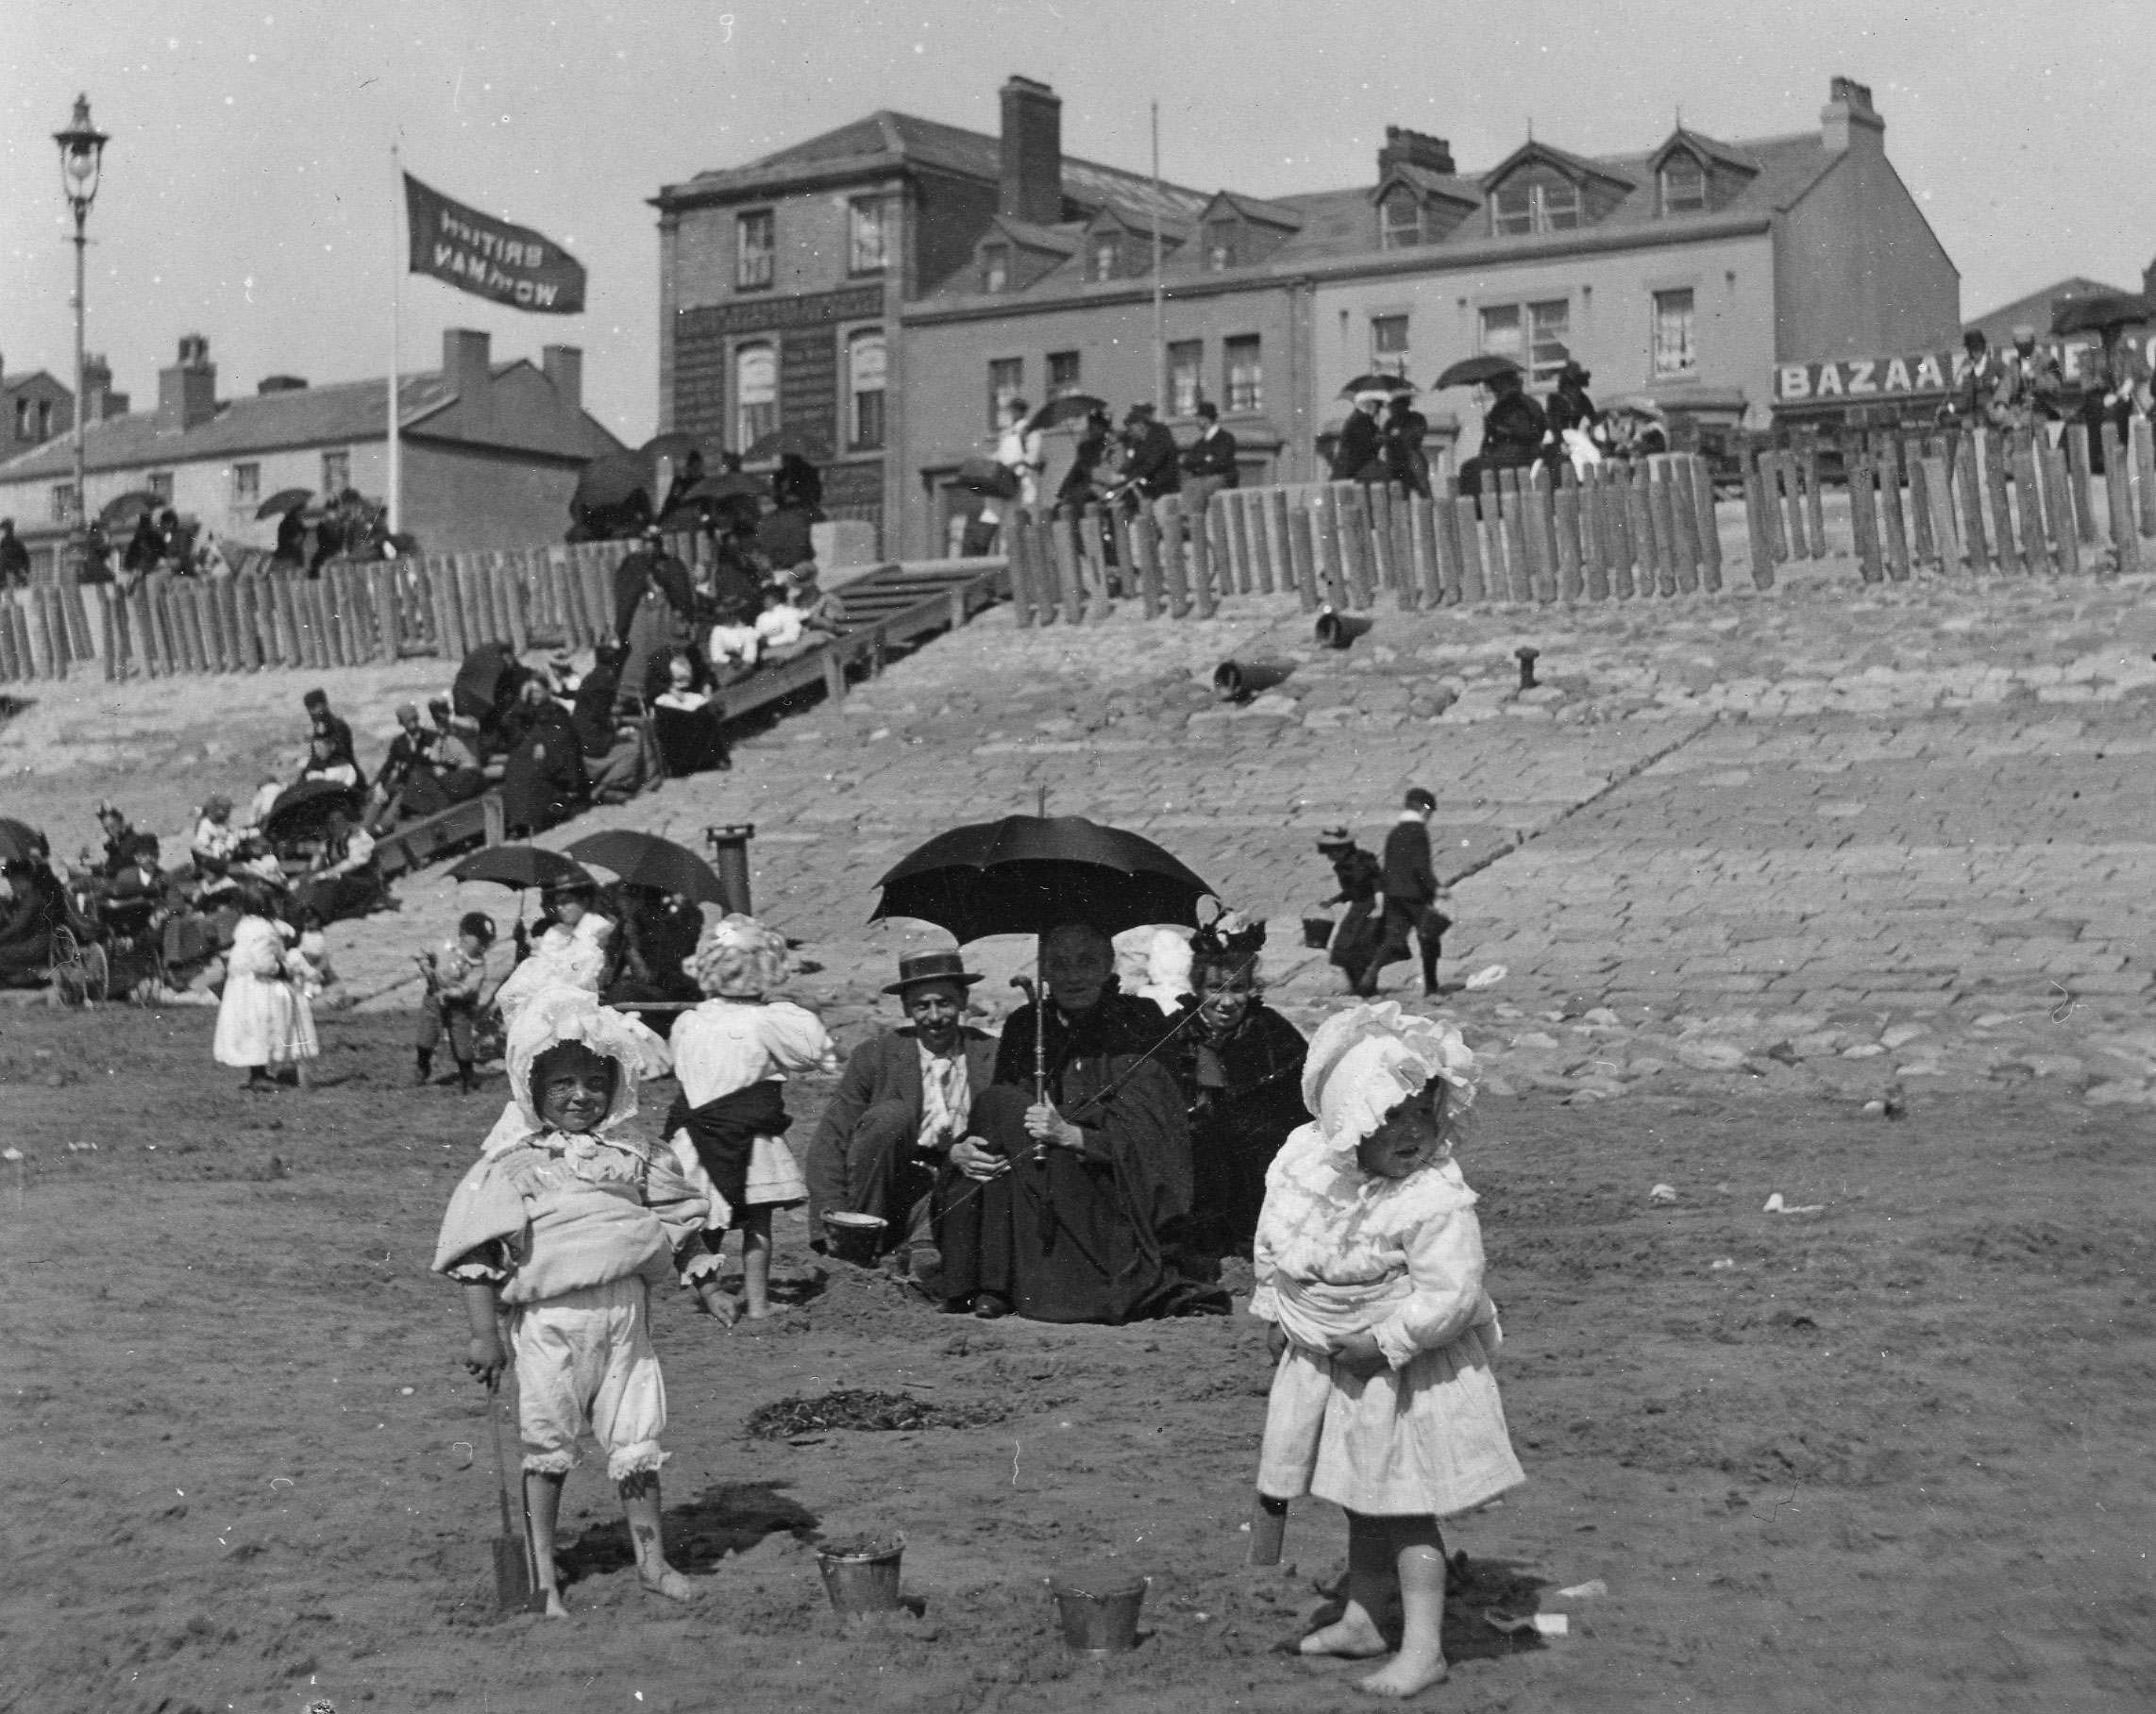 Two children in Victorian clothing stand on a sandy beach. A group of adults, one holding an umbrella, sit behind them and watch.